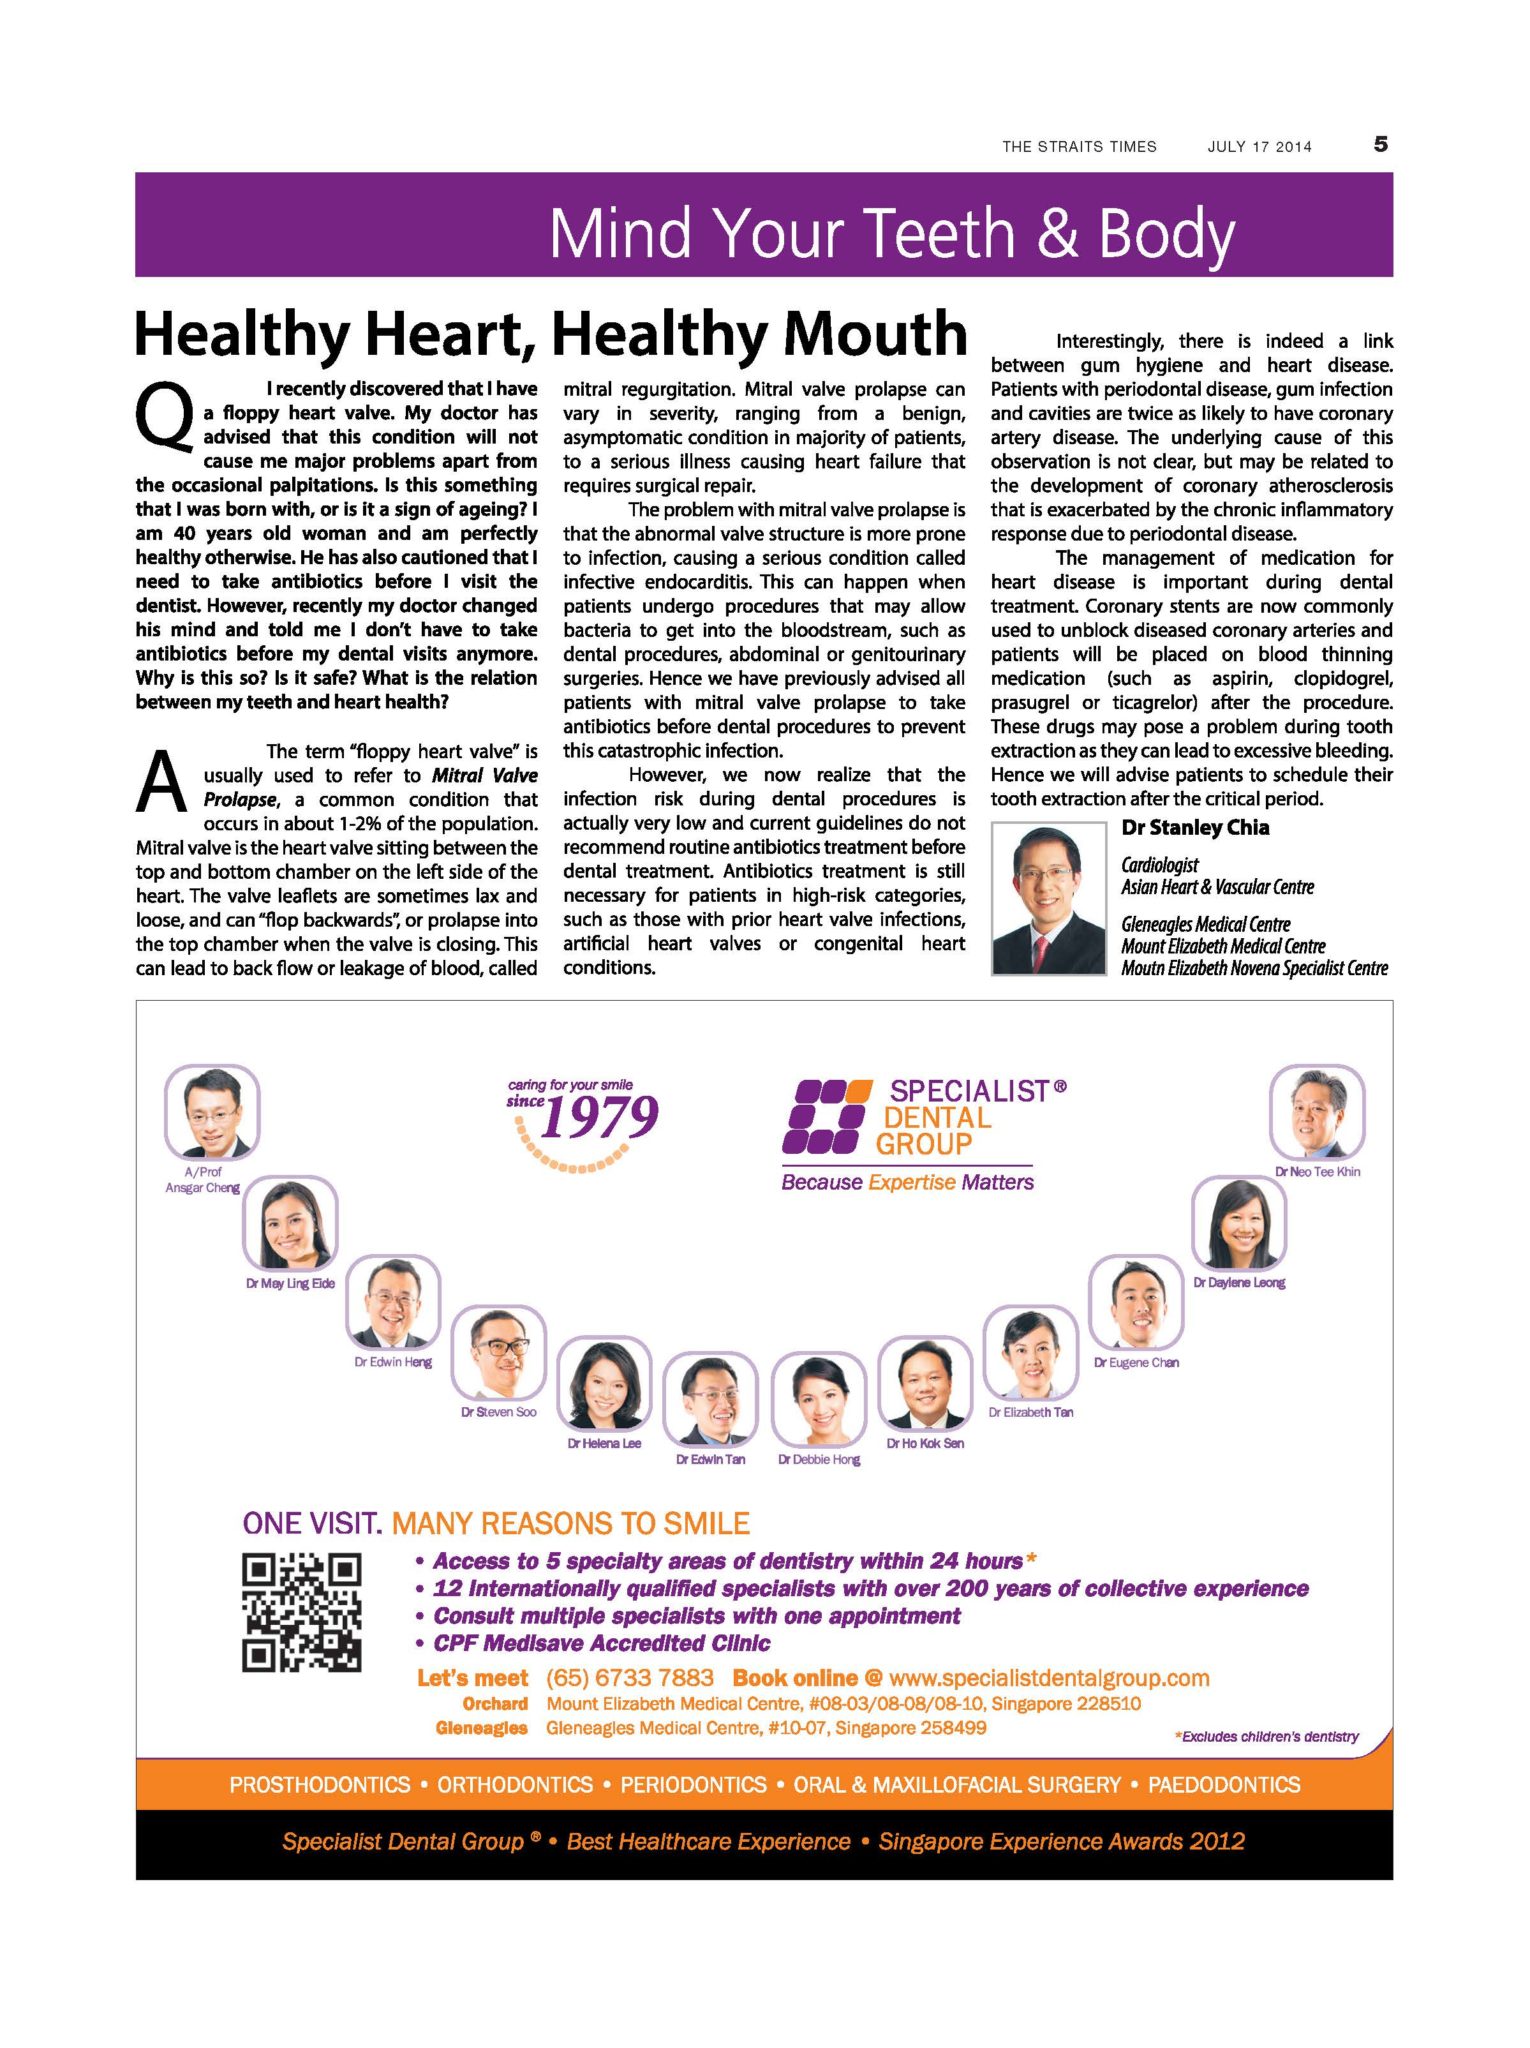 The Straits Times, Mind Your Body, July 17, 2014: “Healthy Heart, Healthy Mouth”